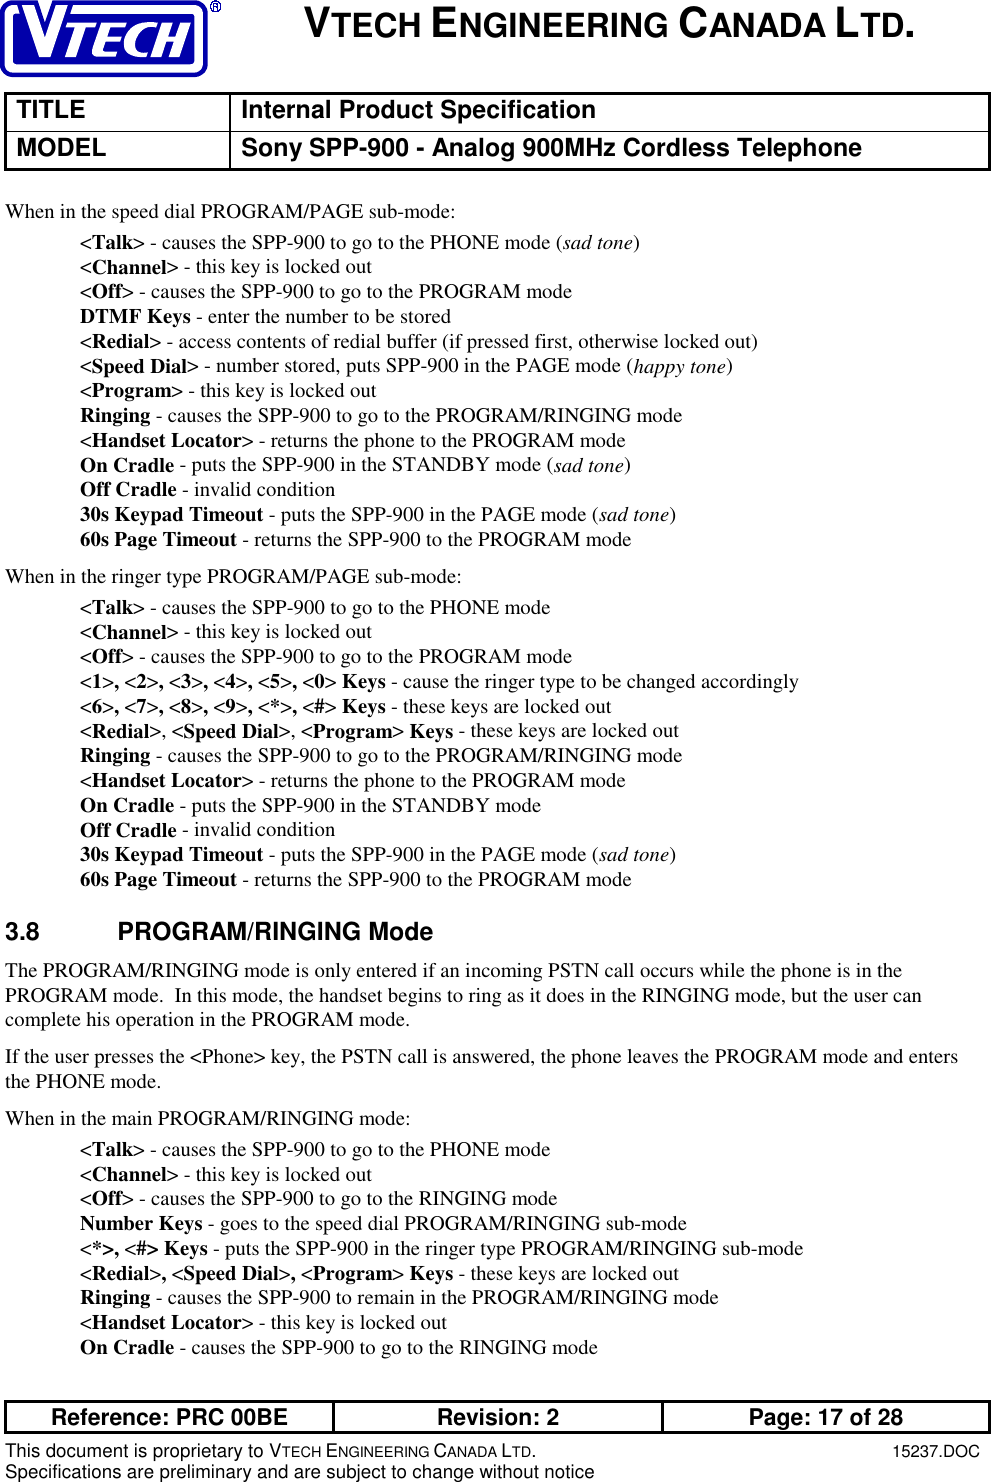 VTECH ENGINEERING CANADA LTD.TITLE Internal Product SpecificationMODEL Sony SPP-900 - Analog 900MHz Cordless TelephoneReference: PRC 00BE Revision: 2 Page: 17 of 28This document is proprietary to VTECH ENGINEERING CANADA LTD.15237.DOCSpecifications are preliminary and are subject to change without noticeWhen in the speed dial PROGRAM/PAGE sub-mode:&lt;Talk&gt; - causes the SPP-900 to go to the PHONE mode (sad tone)&lt;Channel&gt; - this key is locked out&lt;Off&gt; - causes the SPP-900 to go to the PROGRAM modeDTMF Keys - enter the number to be stored&lt;Redial&gt; - access contents of redial buffer (if pressed first, otherwise locked out)&lt;Speed Dial&gt; - number stored, puts SPP-900 in the PAGE mode (happy tone)&lt;Program&gt; - this key is locked outRinging - causes the SPP-900 to go to the PROGRAM/RINGING mode&lt;Handset Locator&gt; - returns the phone to the PROGRAM modeOn Cradle - puts the SPP-900 in the STANDBY mode (sad tone)Off Cradle - invalid condition30s Keypad Timeout - puts the SPP-900 in the PAGE mode (sad tone)60s Page Timeout - returns the SPP-900 to the PROGRAM modeWhen in the ringer type PROGRAM/PAGE sub-mode:&lt;Talk&gt; - causes the SPP-900 to go to the PHONE mode&lt;Channel&gt; - this key is locked out&lt;Off&gt; - causes the SPP-900 to go to the PROGRAM mode&lt;1&gt;, &lt;2&gt;, &lt;3&gt;, &lt;4&gt;, &lt;5&gt;, &lt;0&gt; Keys - cause the ringer type to be changed accordingly&lt;6&gt;, &lt;7&gt;, &lt;8&gt;, &lt;9&gt;, &lt;*&gt;, &lt;#&gt; Keys - these keys are locked out&lt;Redial&gt;, &lt;Speed Dial&gt;, &lt;Program&gt; Keys - these keys are locked outRinging - causes the SPP-900 to go to the PROGRAM/RINGING mode&lt;Handset Locator&gt; - returns the phone to the PROGRAM modeOn Cradle - puts the SPP-900 in the STANDBY modeOff Cradle - invalid condition30s Keypad Timeout - puts the SPP-900 in the PAGE mode (sad tone)60s Page Timeout - returns the SPP-900 to the PROGRAM mode3.8 PROGRAM/RINGING ModeThe PROGRAM/RINGING mode is only entered if an incoming PSTN call occurs while the phone is in thePROGRAM mode.  In this mode, the handset begins to ring as it does in the RINGING mode, but the user cancomplete his operation in the PROGRAM mode.If the user presses the &lt;Phone&gt; key, the PSTN call is answered, the phone leaves the PROGRAM mode and entersthe PHONE mode.When in the main PROGRAM/RINGING mode:&lt;Talk&gt; - causes the SPP-900 to go to the PHONE mode&lt;Channel&gt; - this key is locked out&lt;Off&gt; - causes the SPP-900 to go to the RINGING modeNumber Keys - goes to the speed dial PROGRAM/RINGING sub-mode&lt;*&gt;, &lt;#&gt; Keys - puts the SPP-900 in the ringer type PROGRAM/RINGING sub-mode&lt;Redial&gt;, &lt;Speed Dial&gt;, &lt;Program&gt; Keys - these keys are locked outRinging - causes the SPP-900 to remain in the PROGRAM/RINGING mode&lt;Handset Locator&gt; - this key is locked outOn Cradle - causes the SPP-900 to go to the RINGING mode